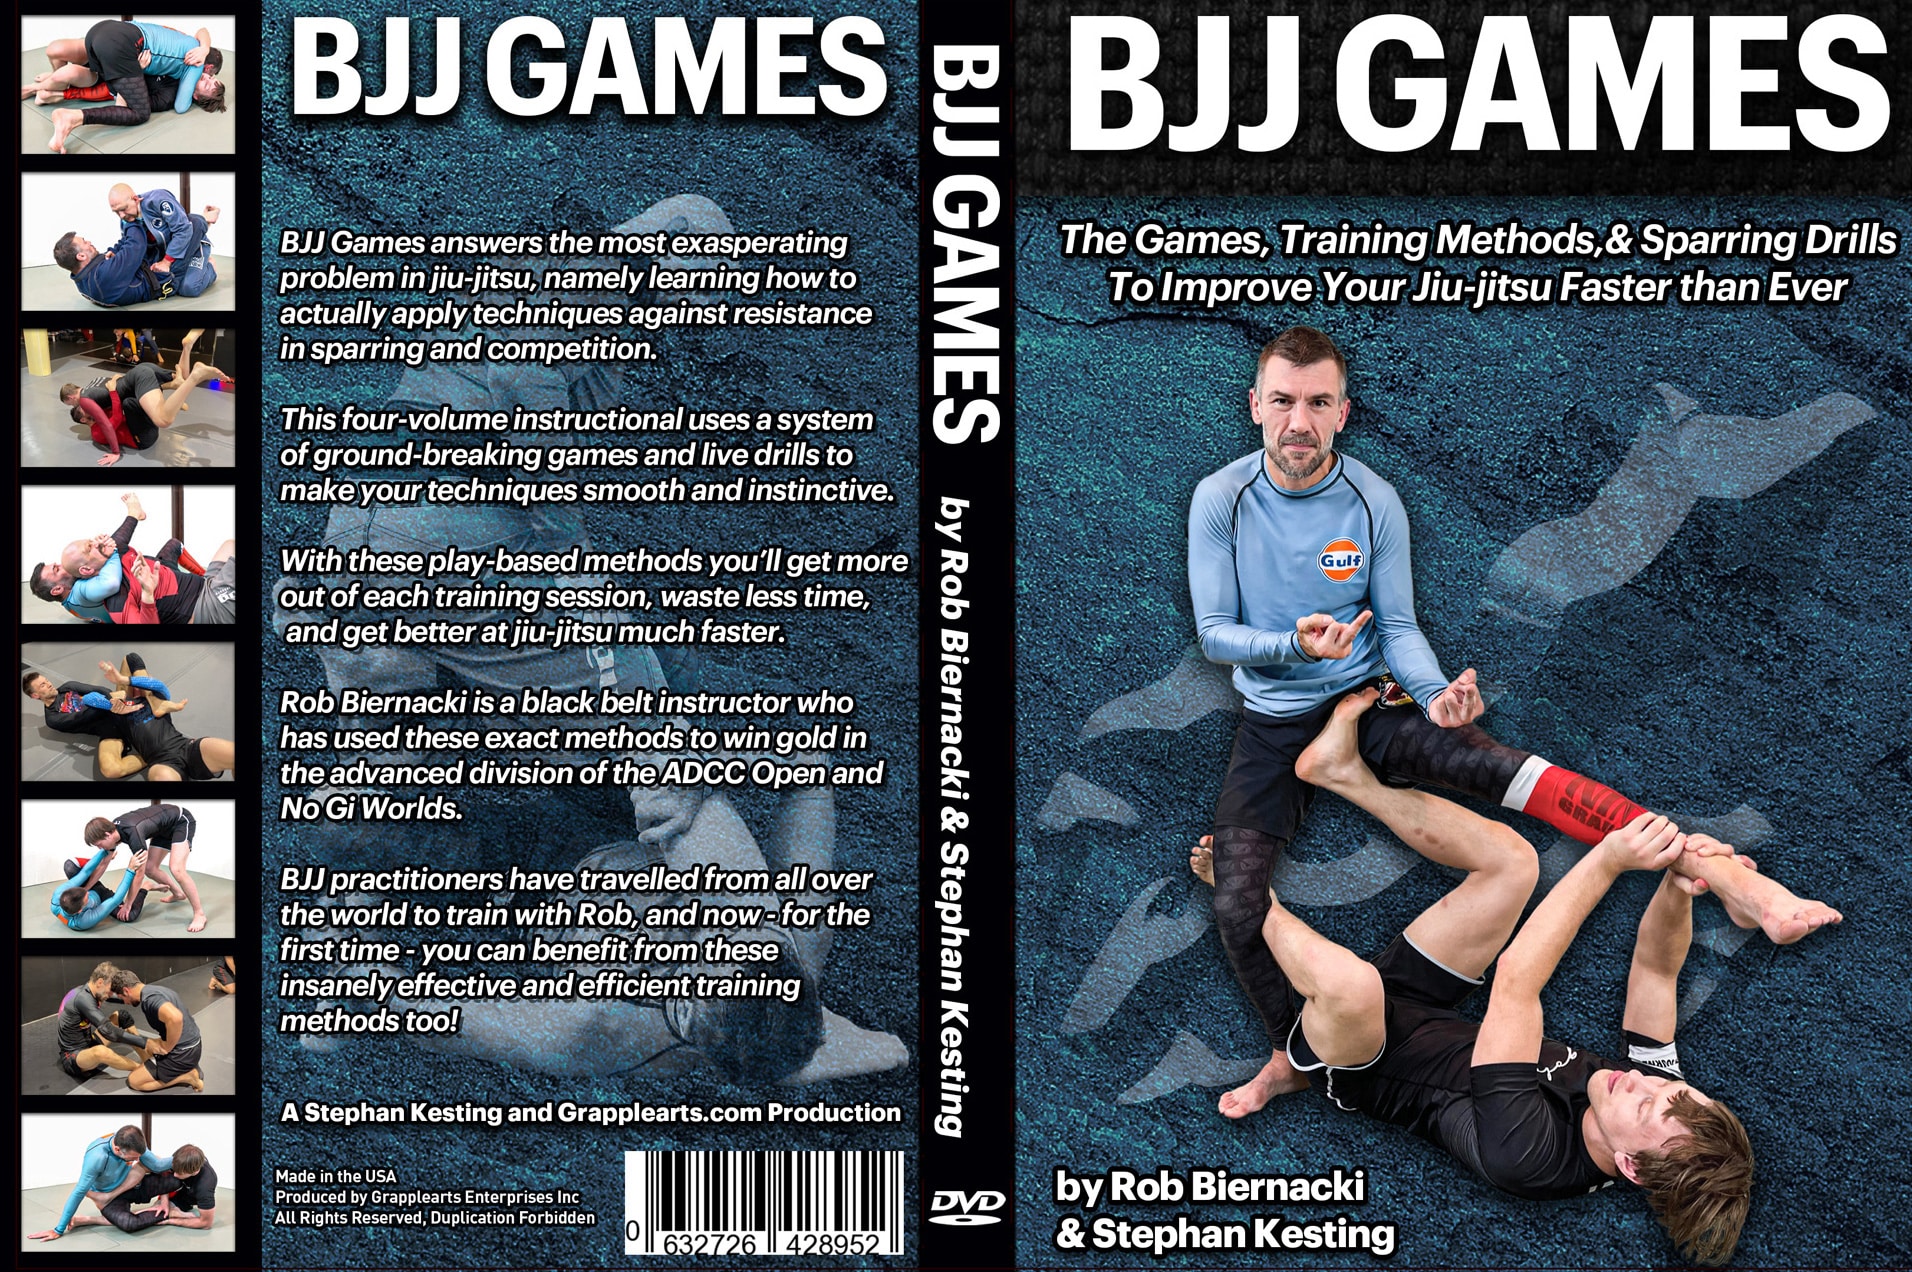 BJJ Games, the New Instructional featuring Rob Biernacki